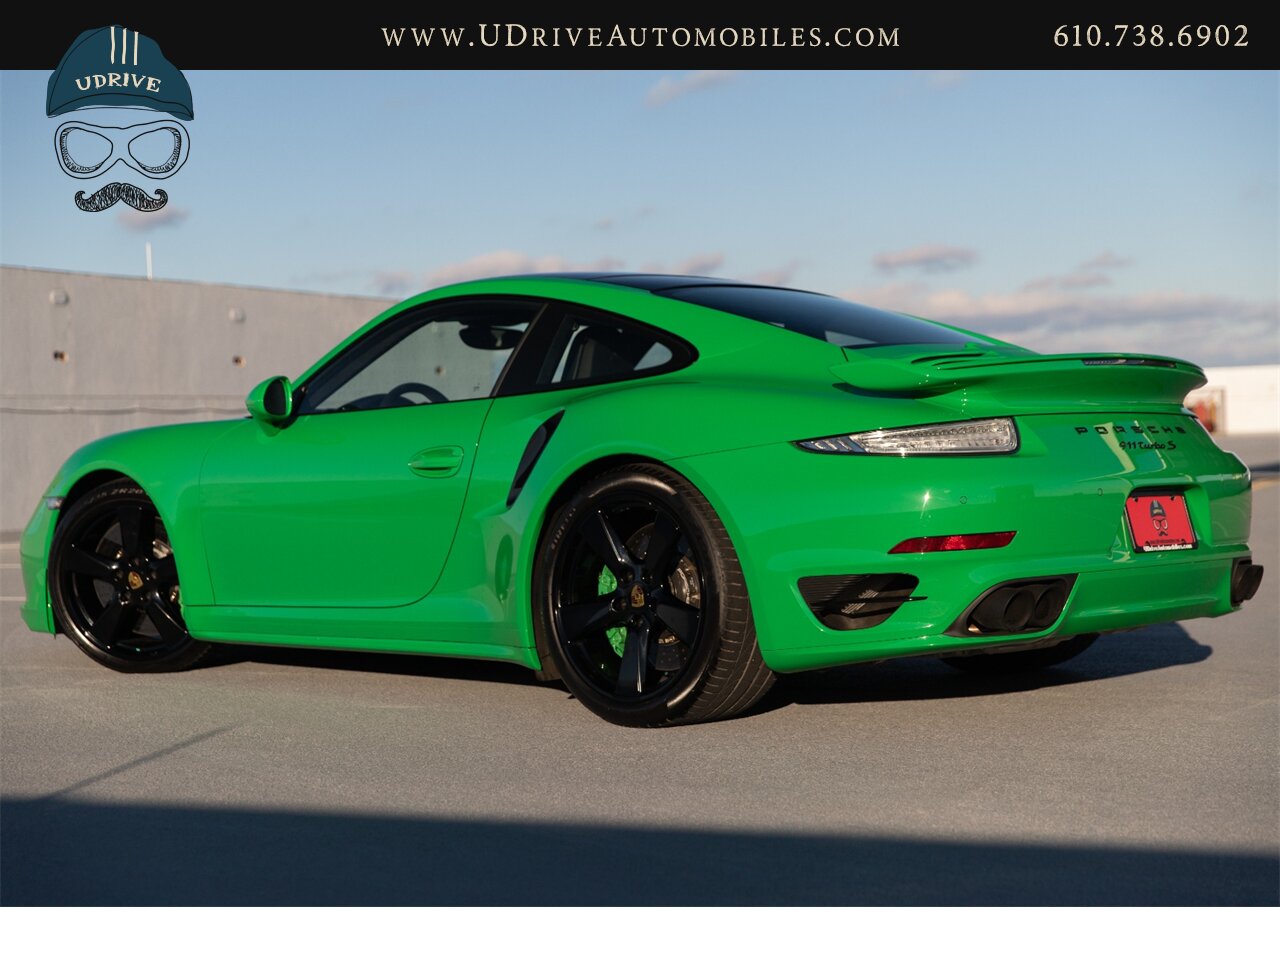 2016 Porsche 911 Turbo S PTS Viper Green Aerokit $203k MSRP  Painted Side Skirts Painted Grilles Wheels in Black - Photo 5 - West Chester, PA 19382